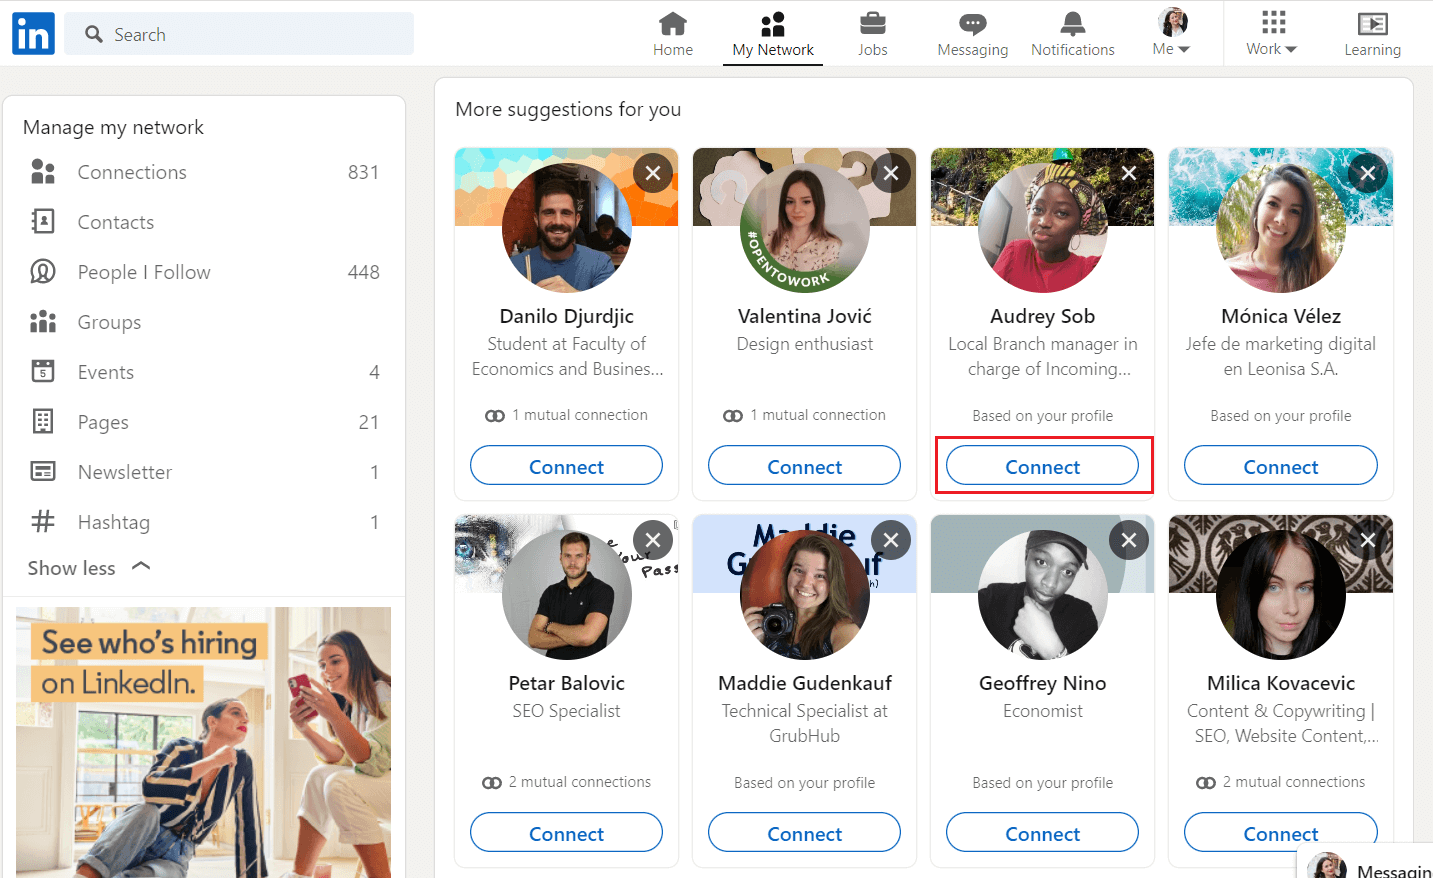 Image of how to connect with someone on LinkedIn via more suggestions option